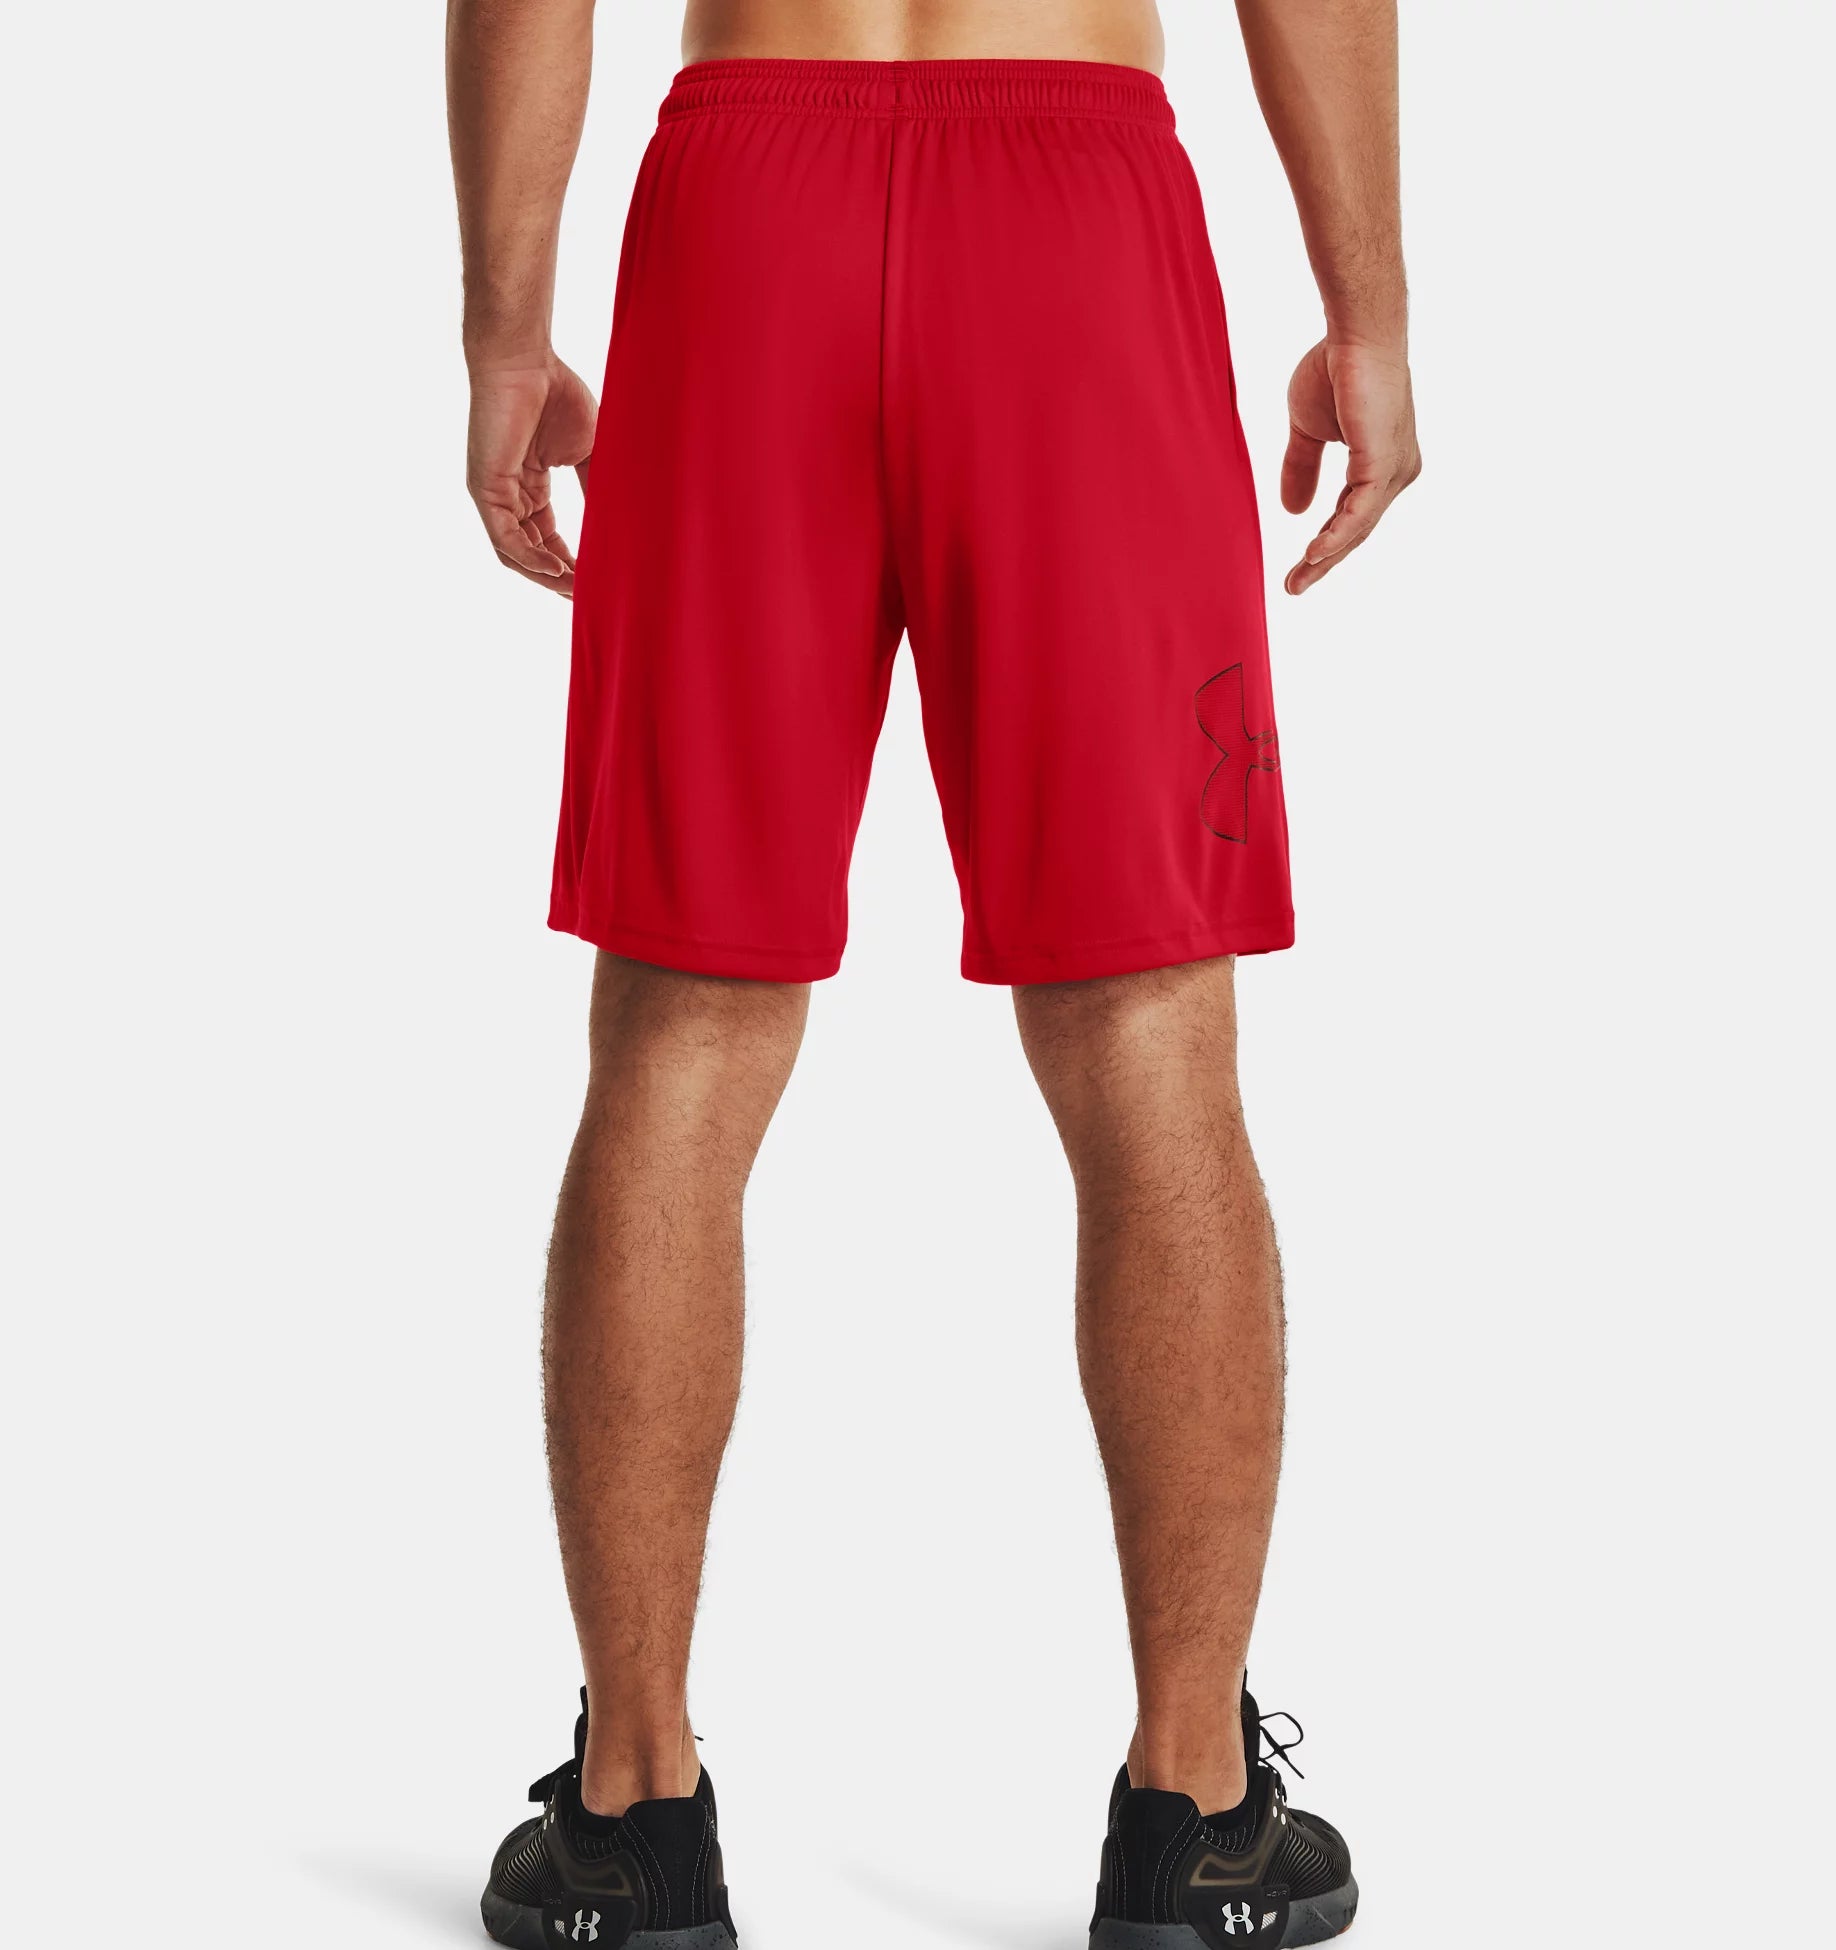 Under Armour Tech Graphic Shorts 1306443 - Clothing & Accessories